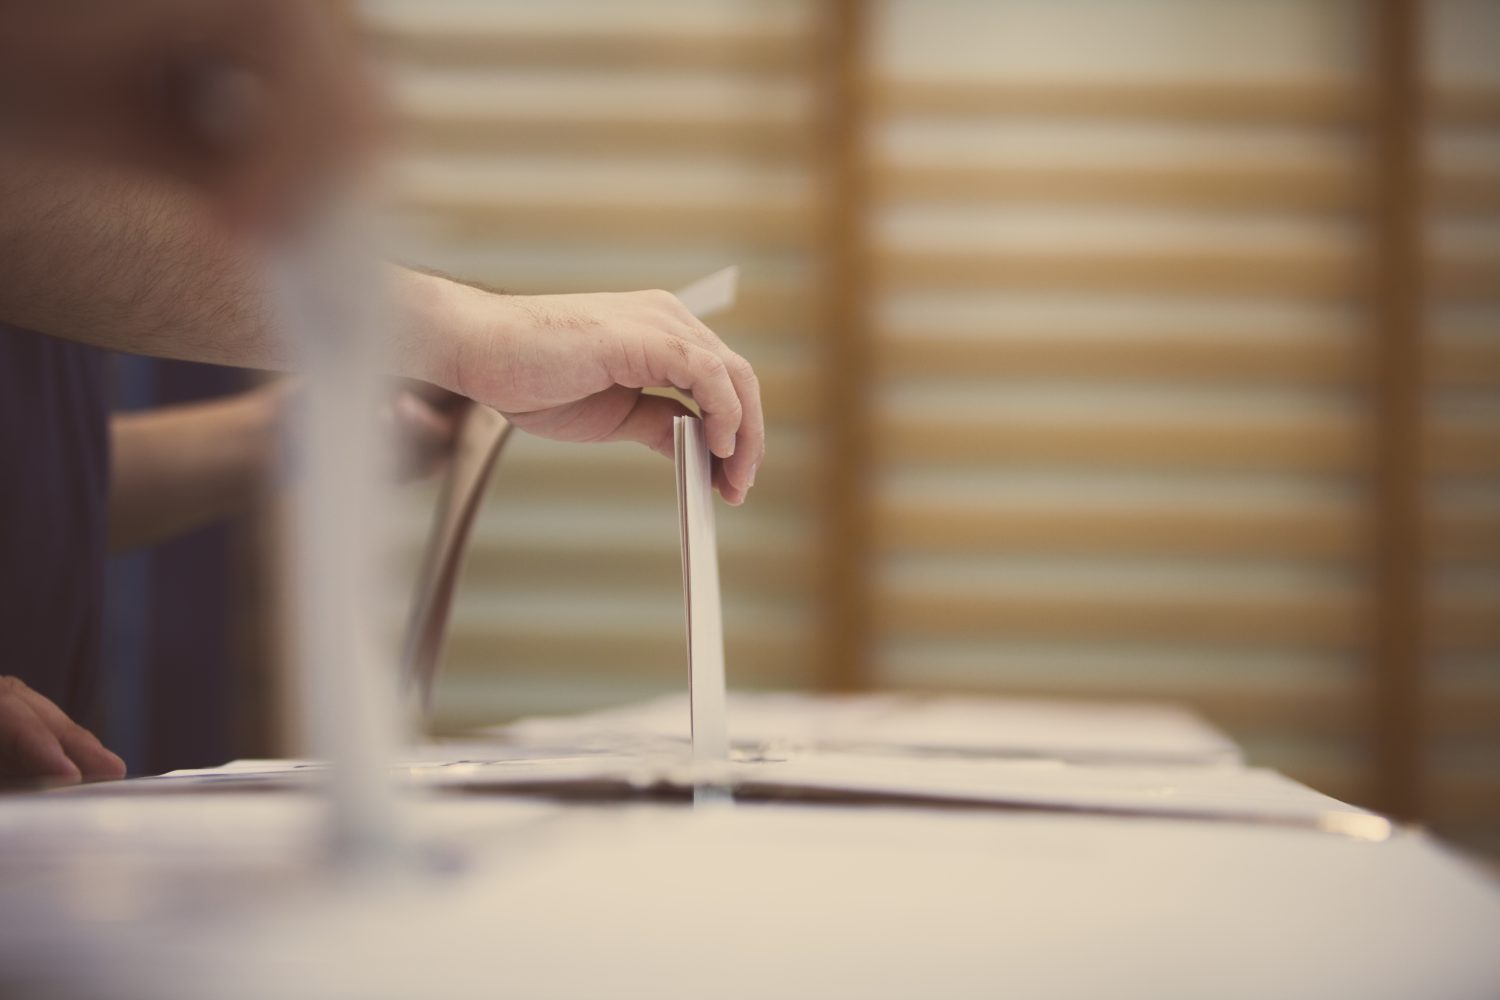 Hyperledger Blockchain Group Weighs Changes To Fix Election Issues